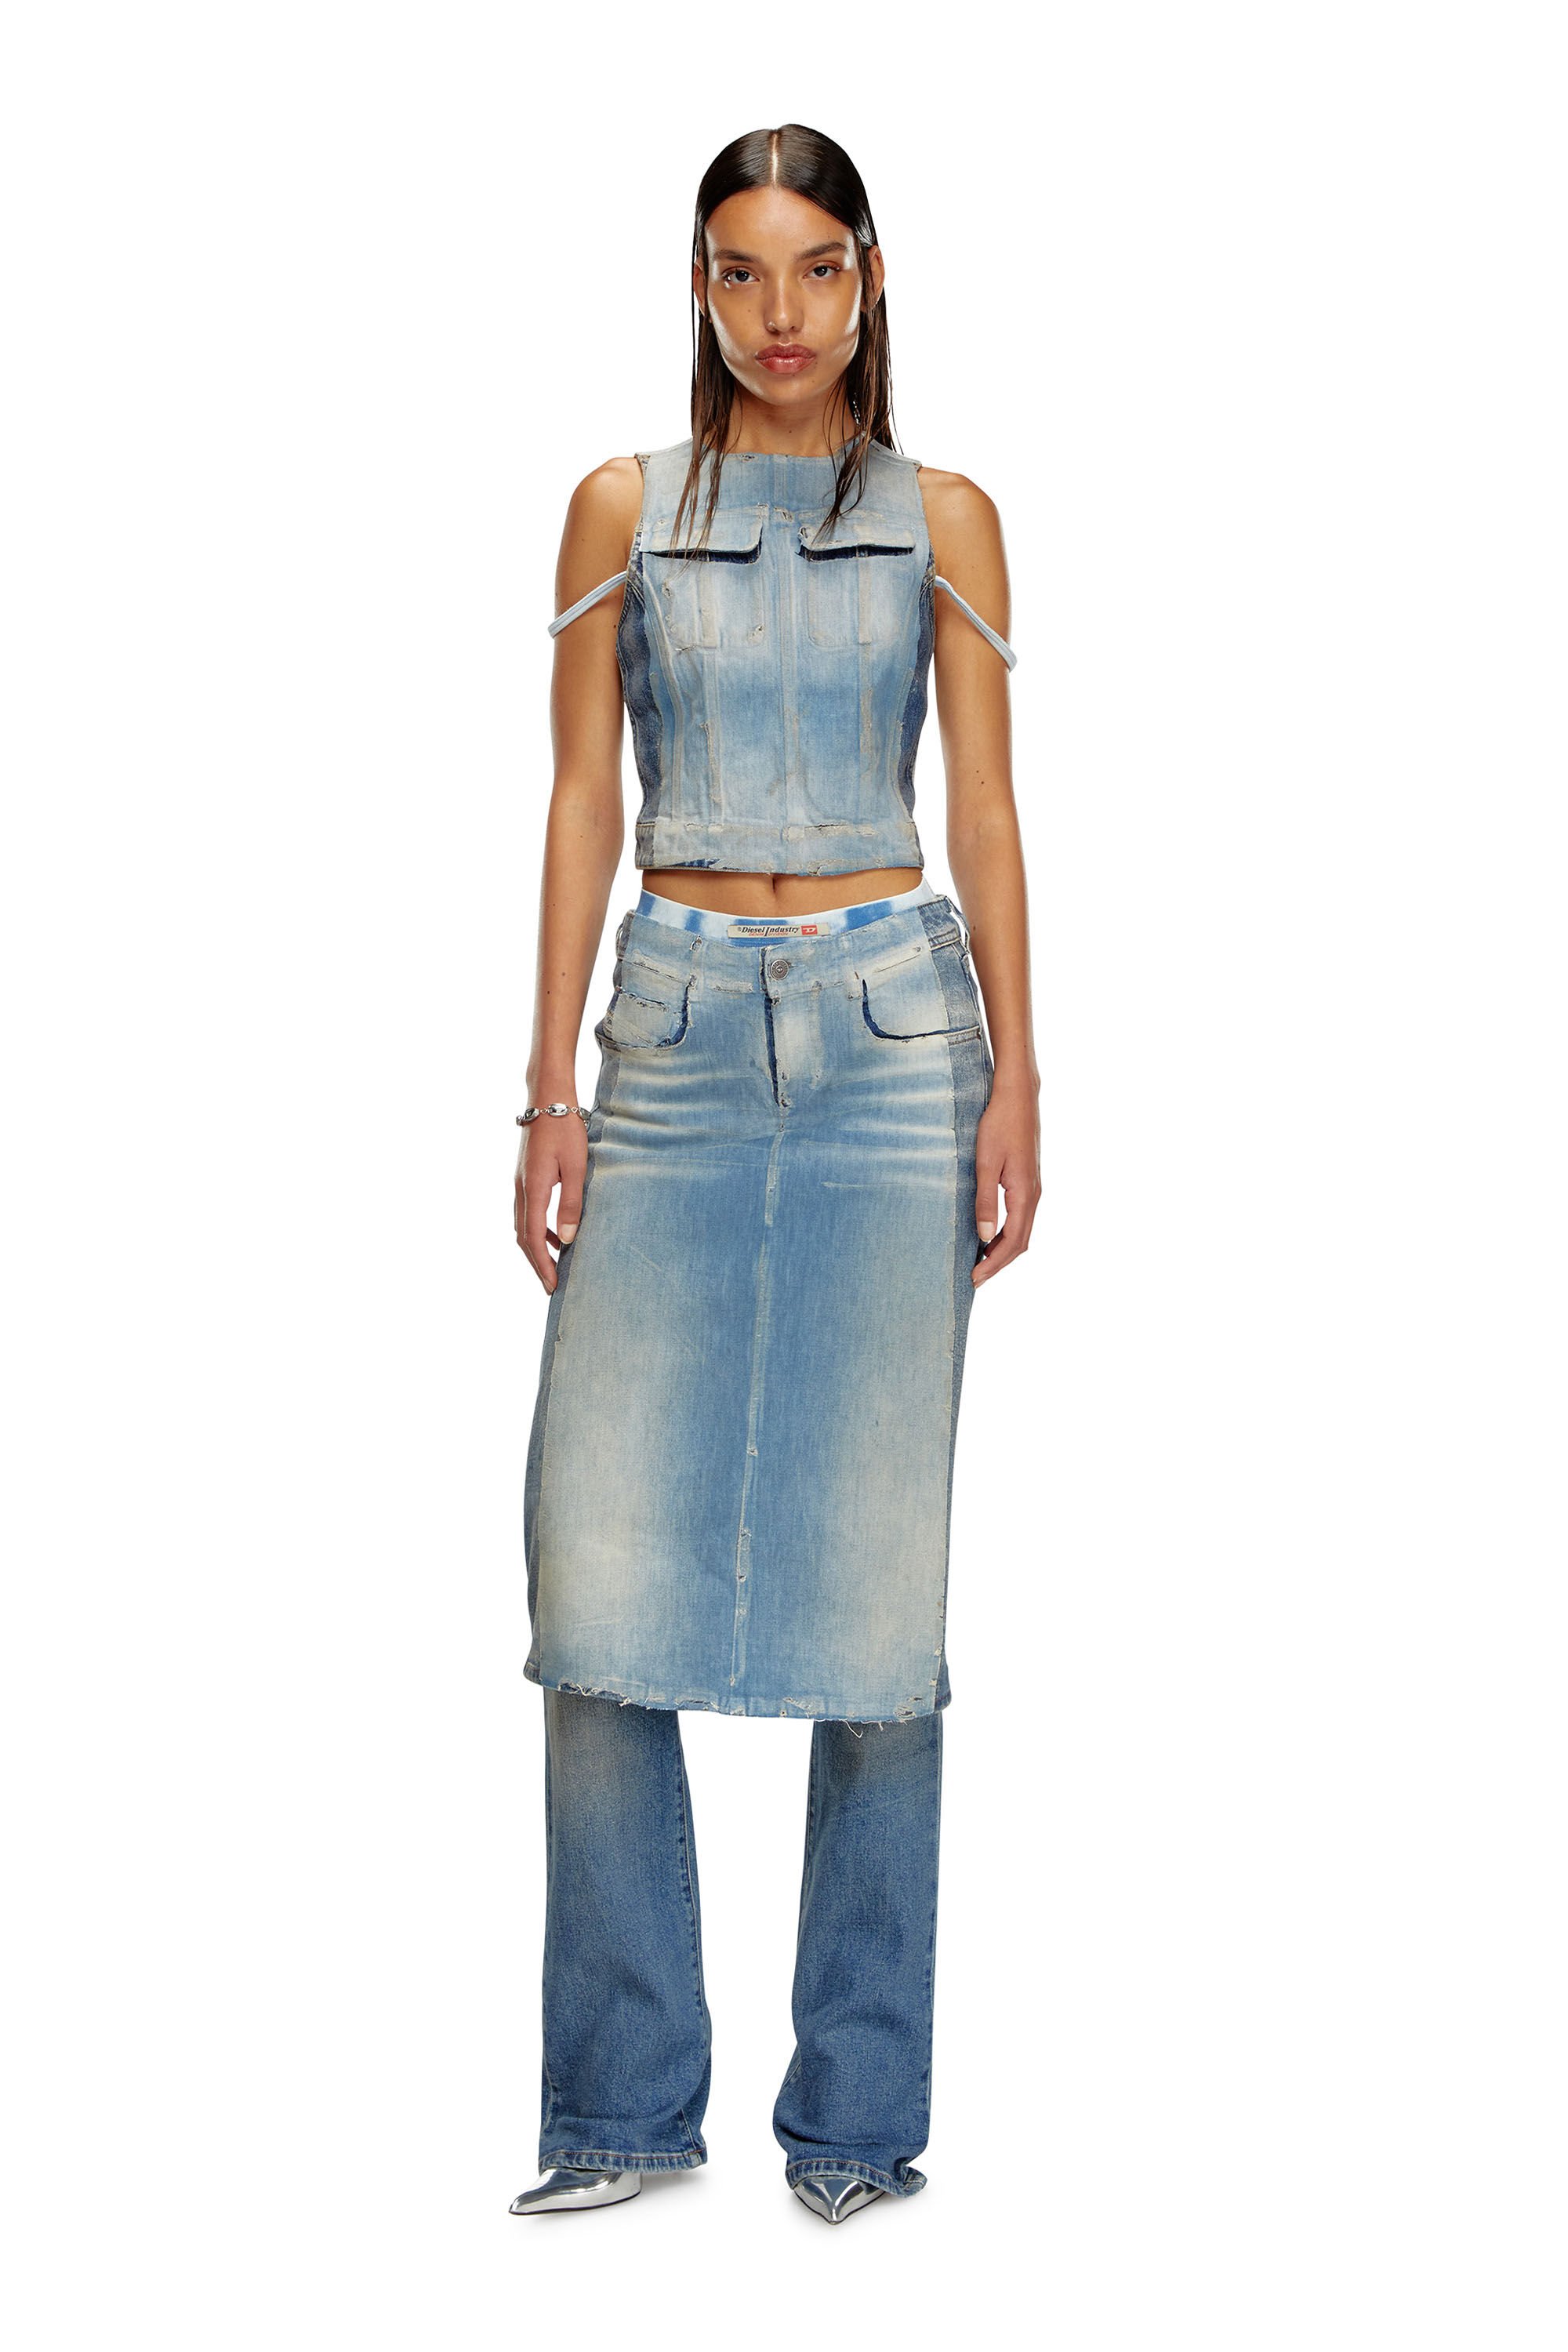 Diesel - Bootcut and Flare Jeans D-Sel 007X8, Mujer Bootcut y Flare Jeans - D-Sel in Azul marino - Image 1